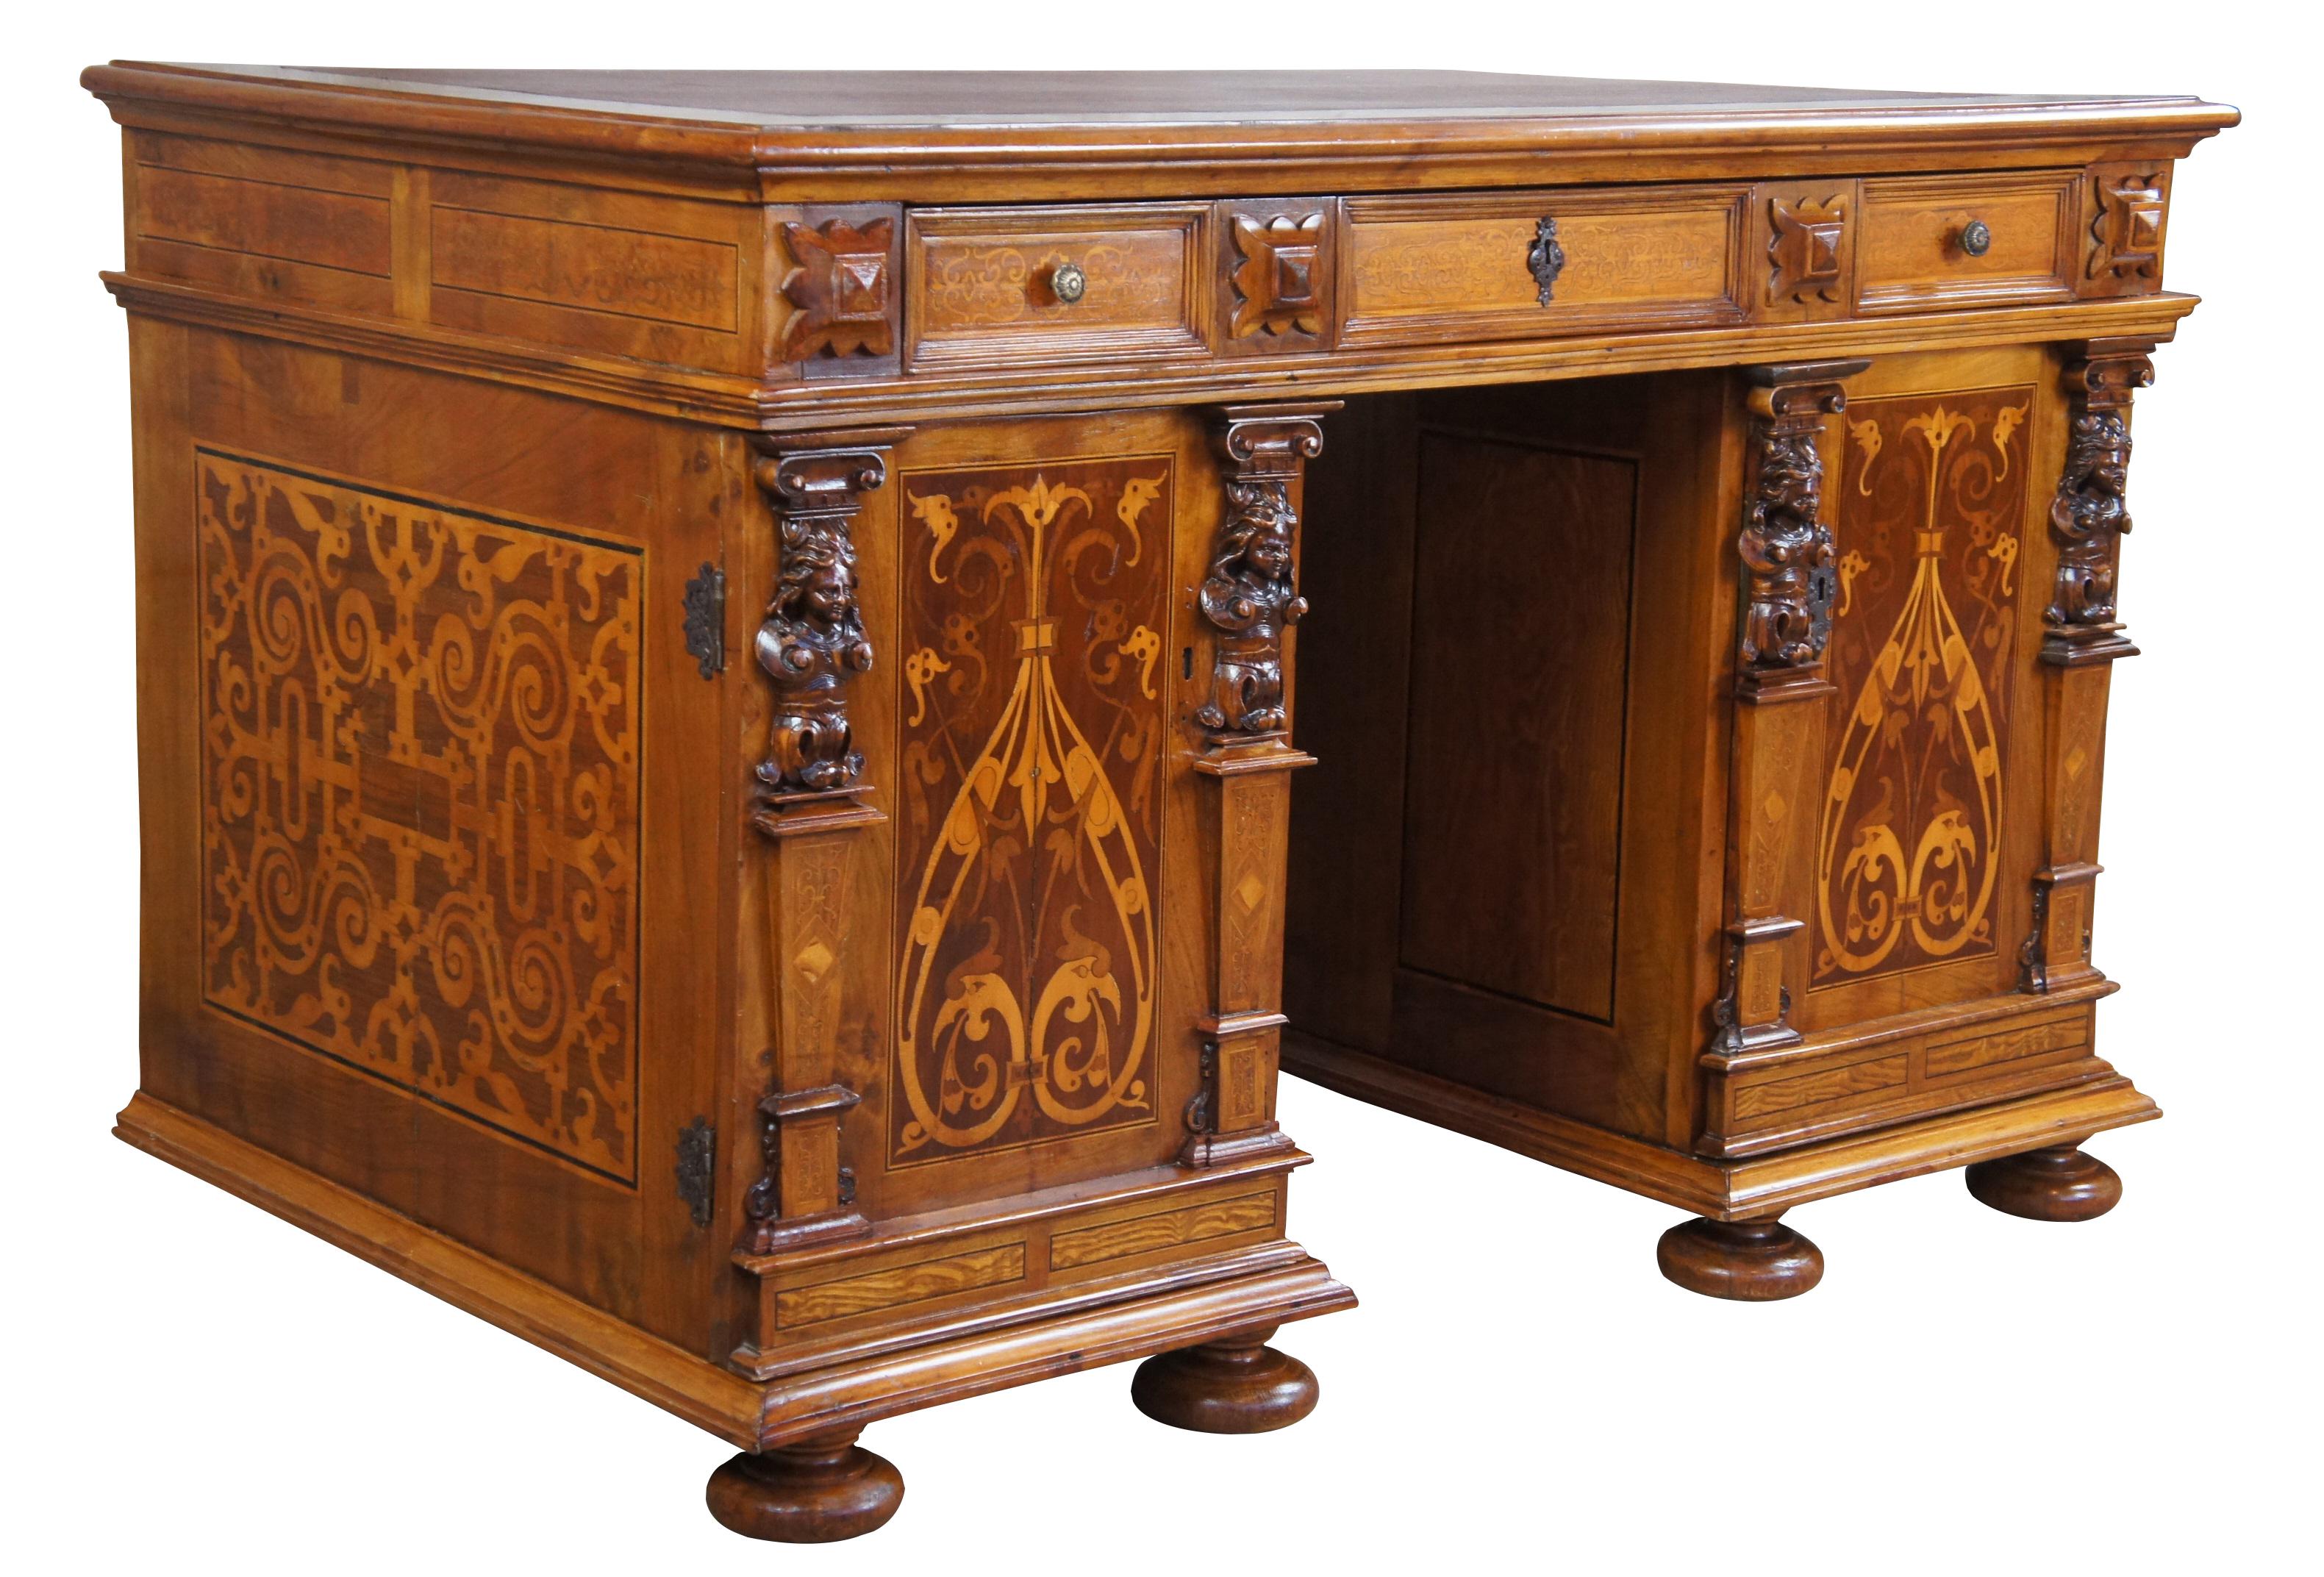 Antique Italian marquetry writing or library desk, Made from walnut with carved inlays of oak and fruitwood, circa 1900s. Features an inset leather top over a long frieze drawer on two figural carved pedestals enclosing three drawers each, on a